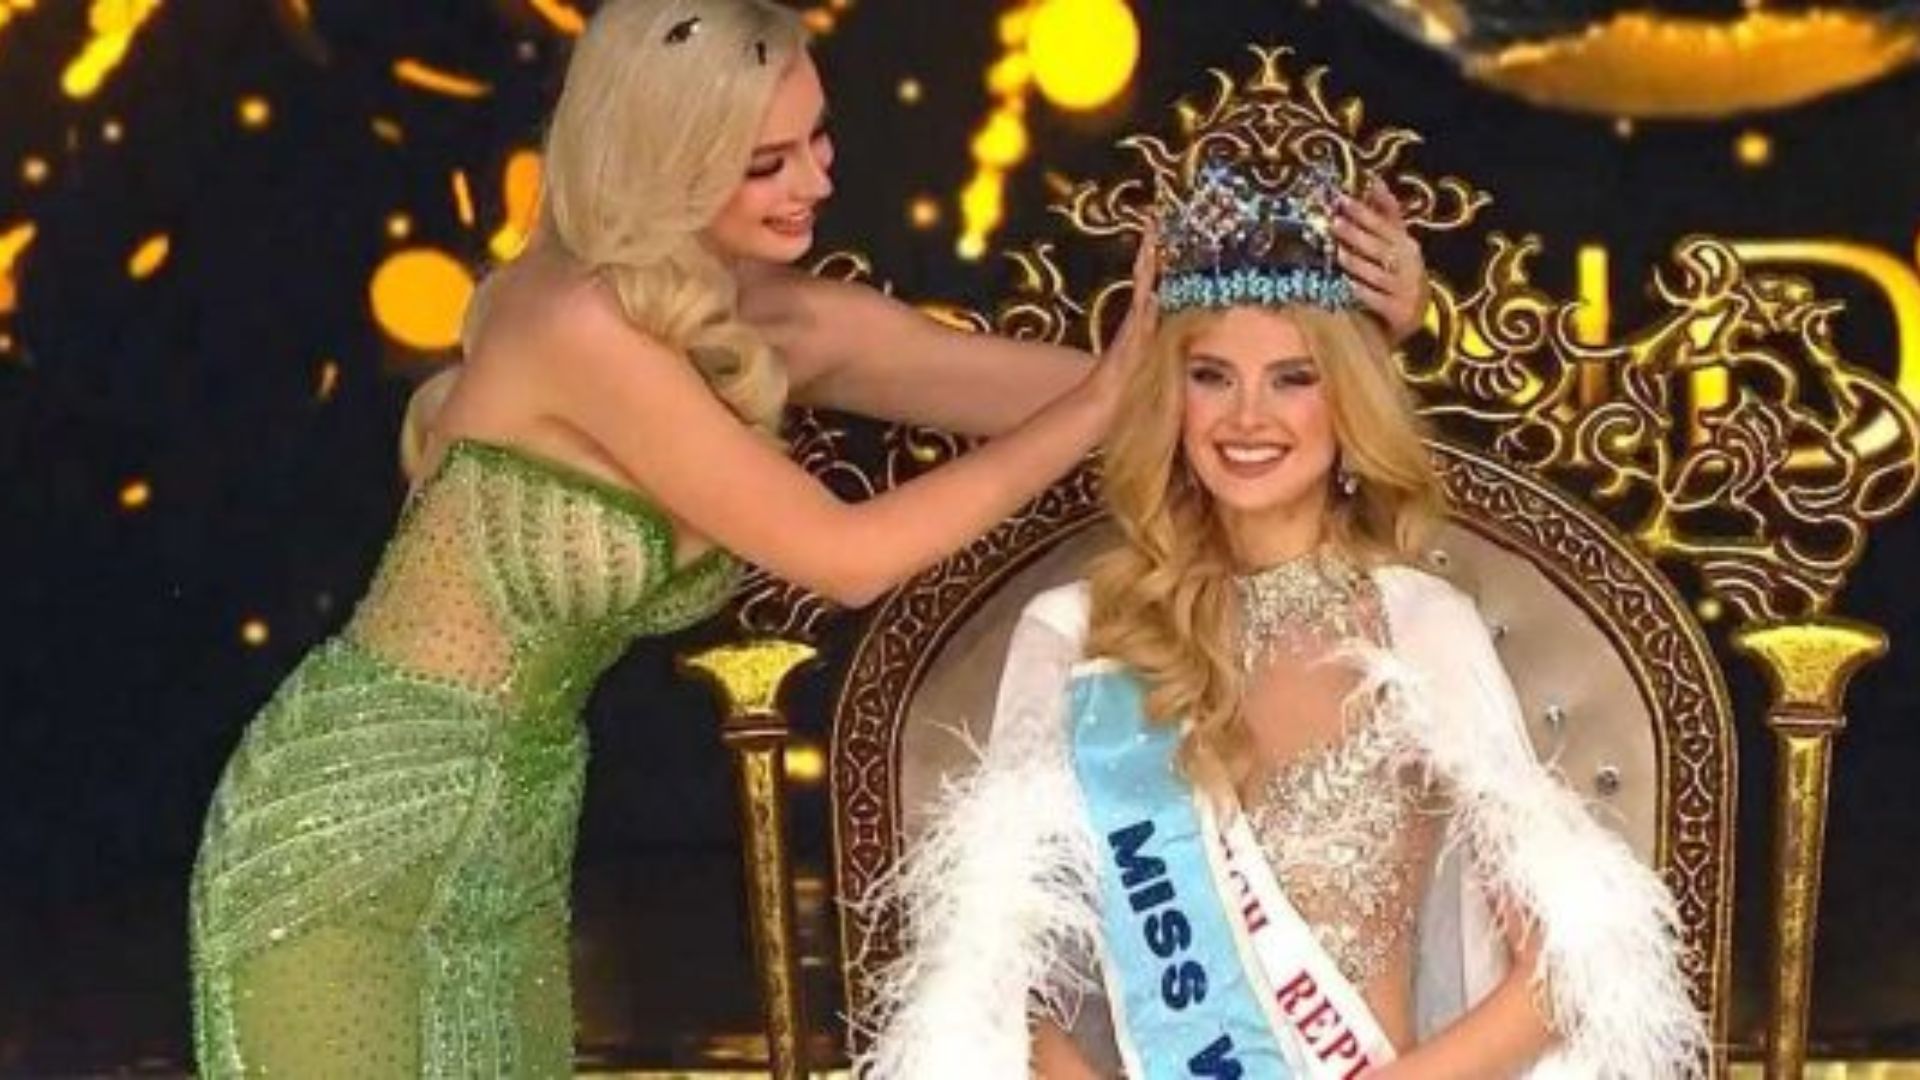 “Miss World was something I was working on for so long”: Krystyna Pyszkova after winning the title